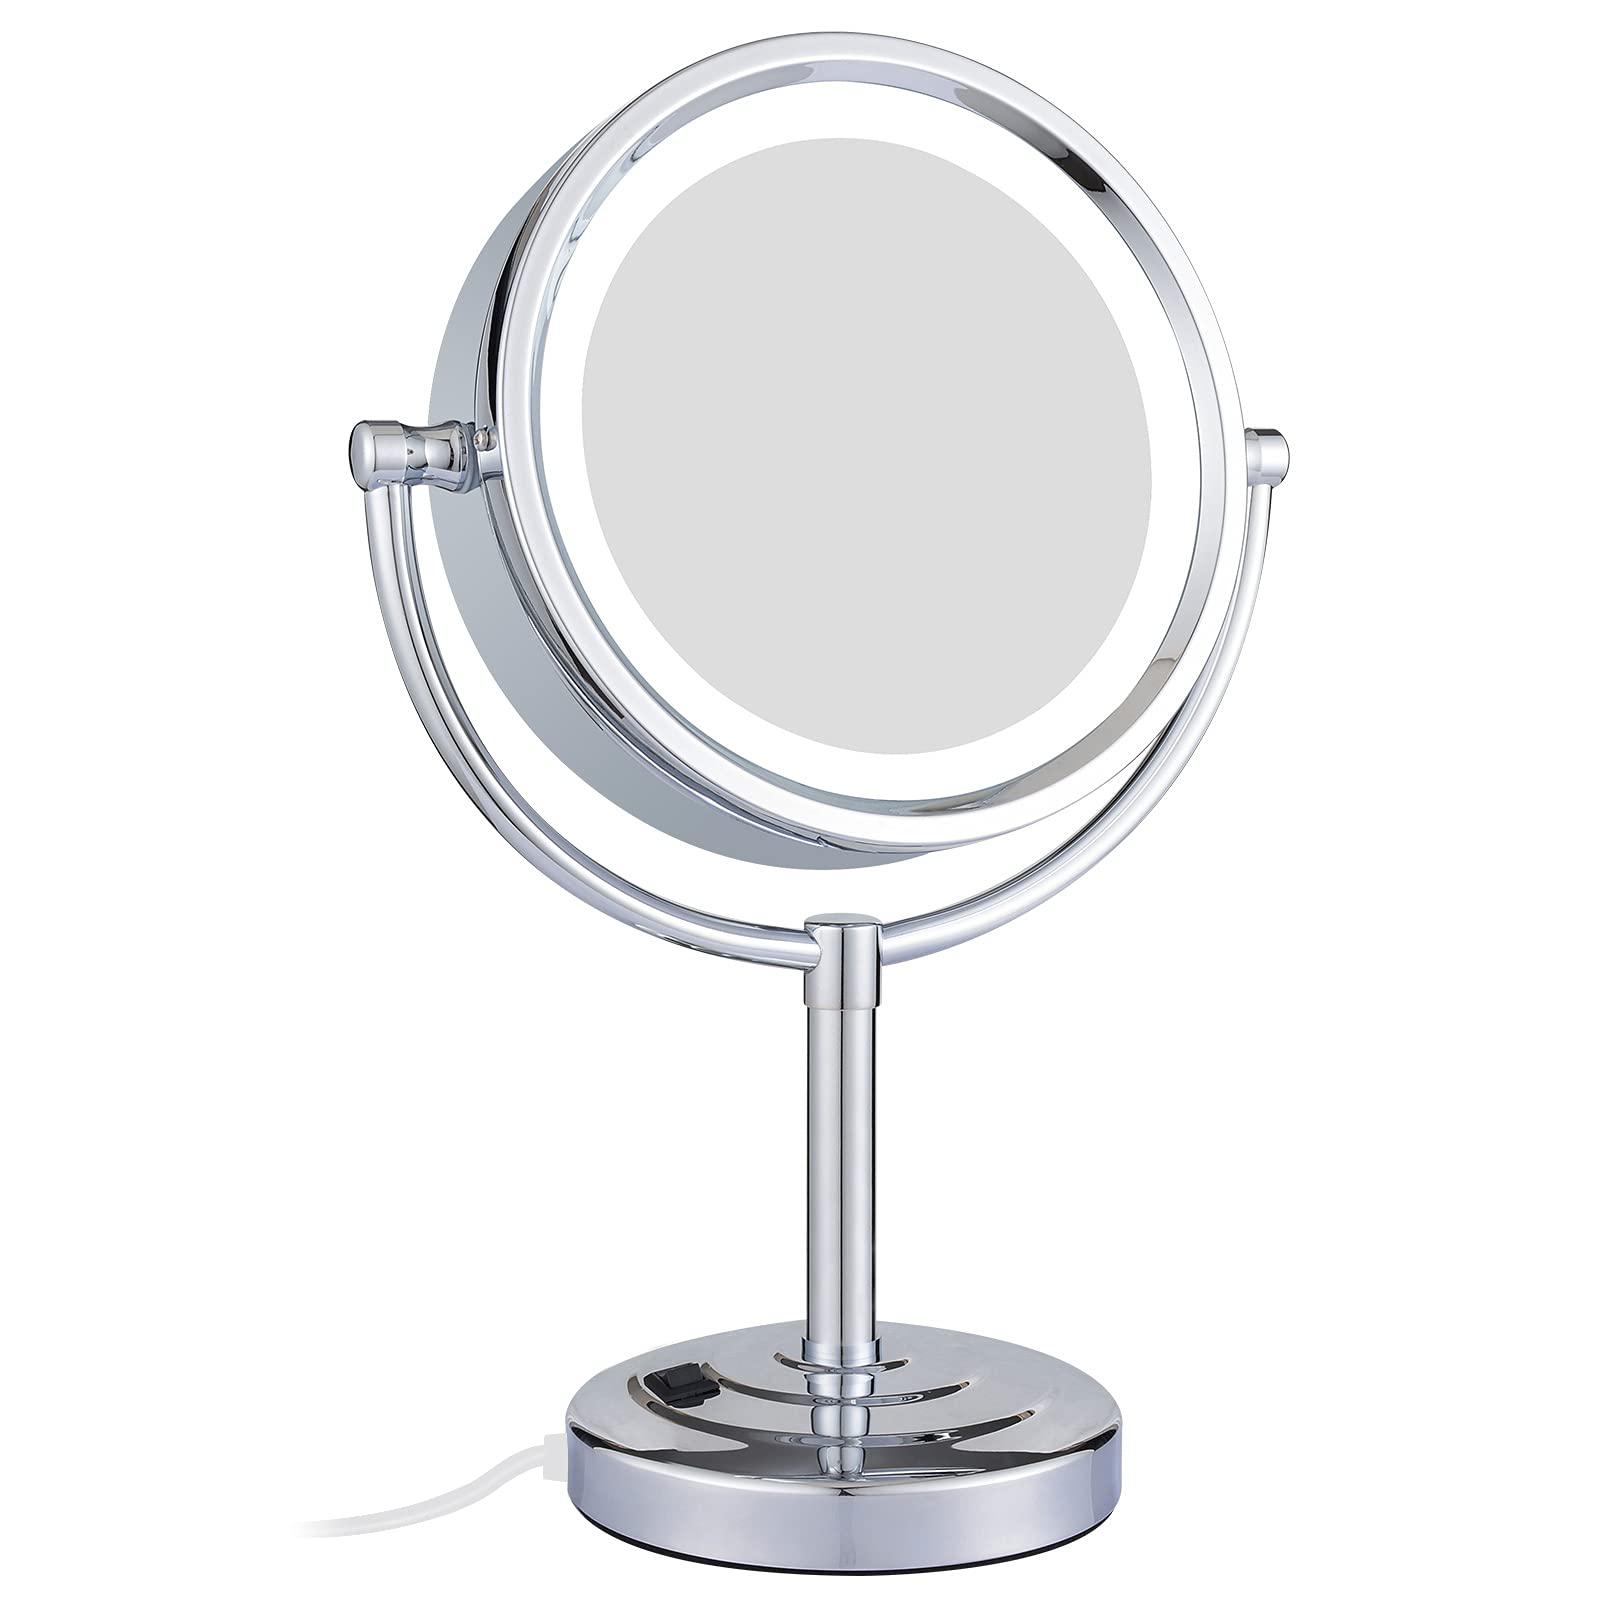 gurun 8.5 inch tabletop led lighted makeup mirror with 10x magnification double sided vanity mirror plug power chrome finish 